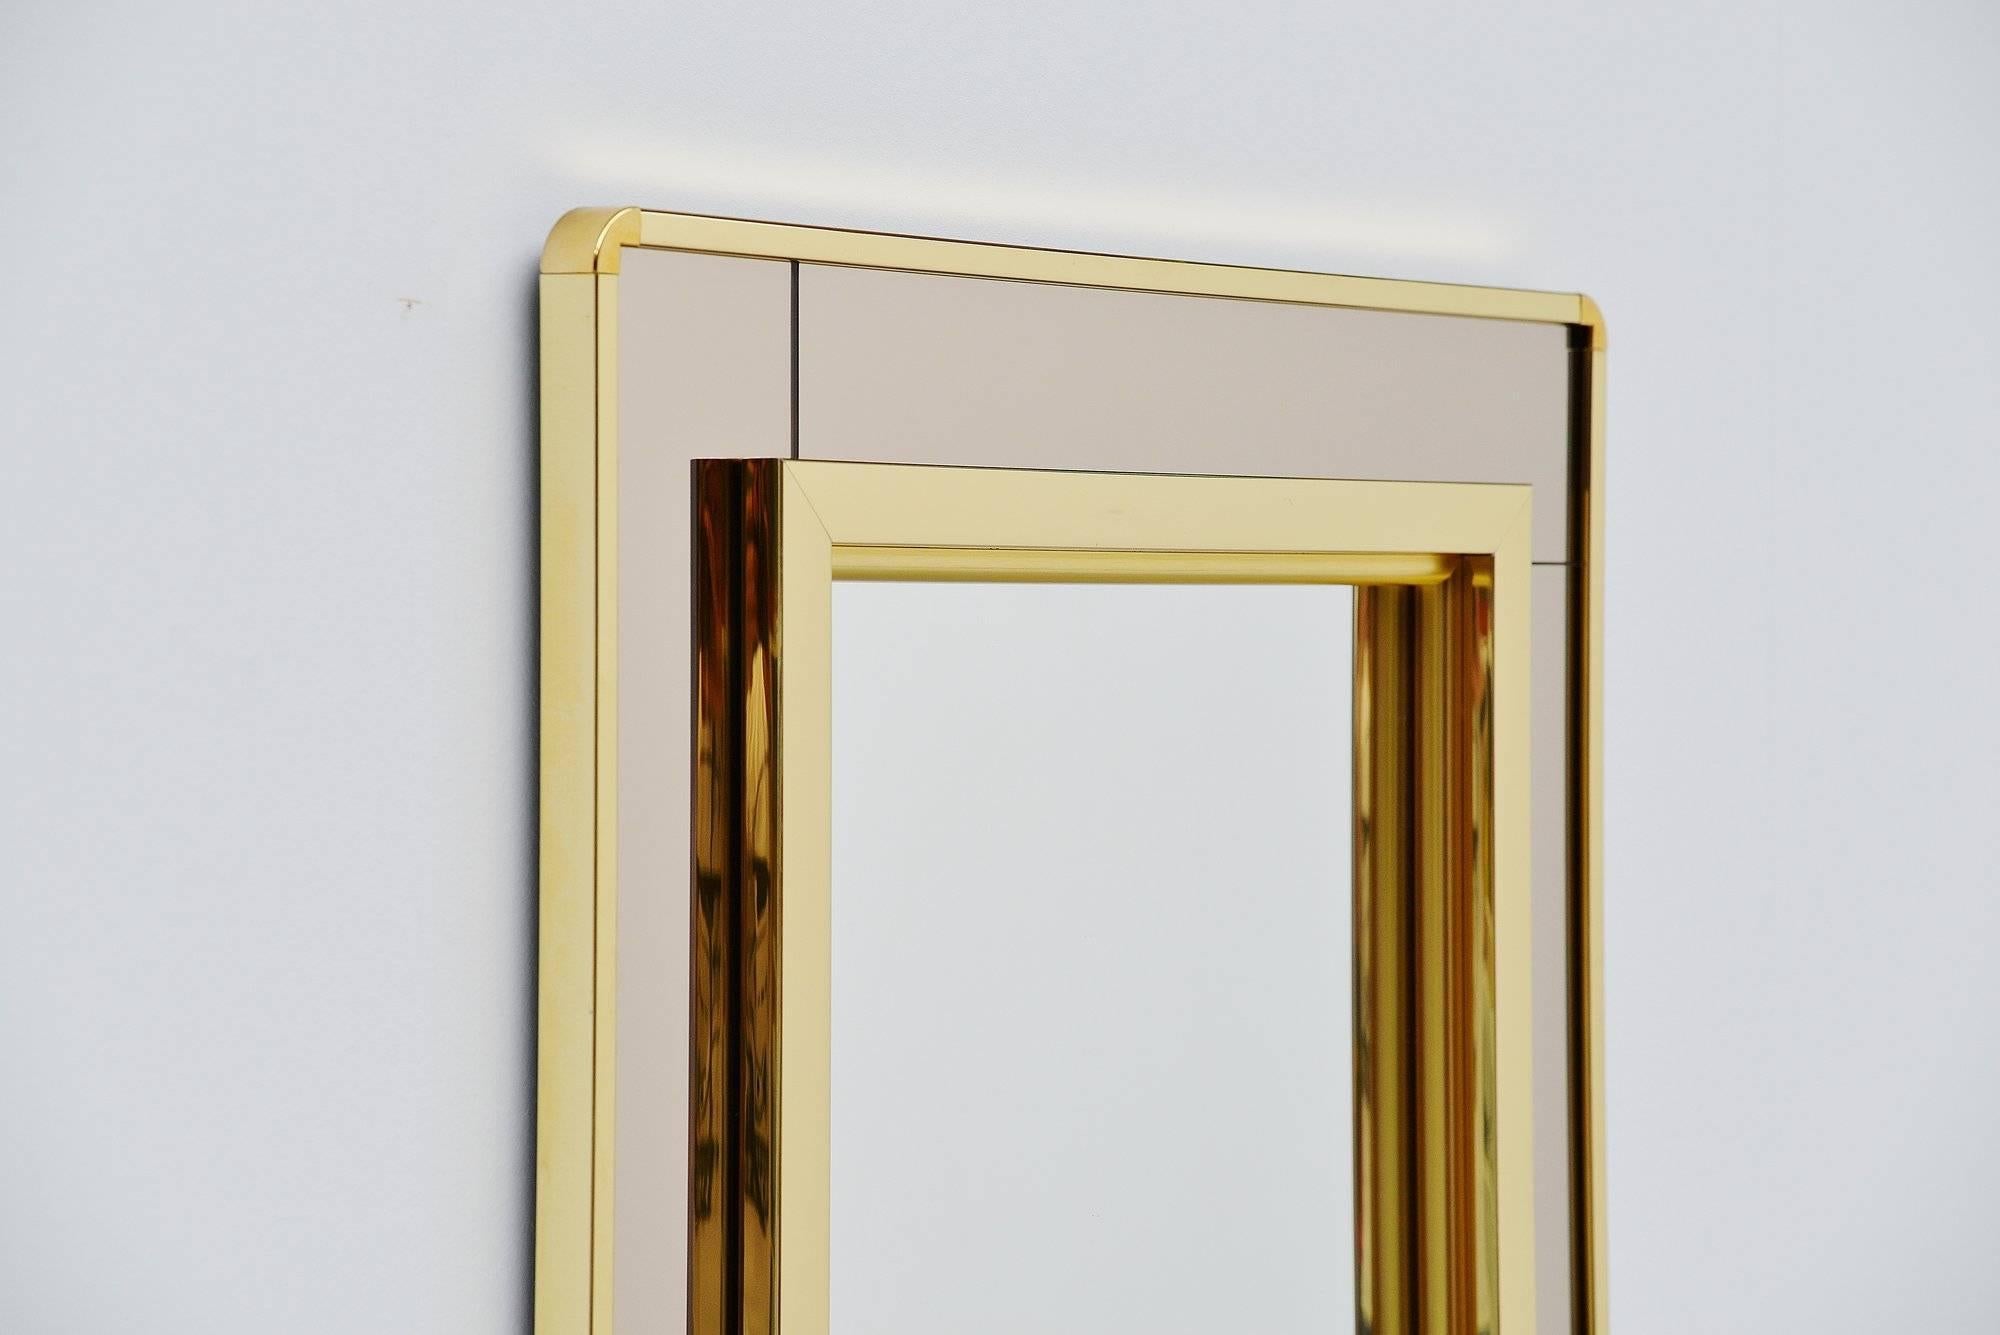 Decorative wall-mounted mirror in the style of Romeo Rega and Willy Rizzo, Italy, 1970. The mirror is made of brass anodized aluminium and is made of heavy quality materials. Easy to wall hang and highly decorative. In excellent clean condition.

 